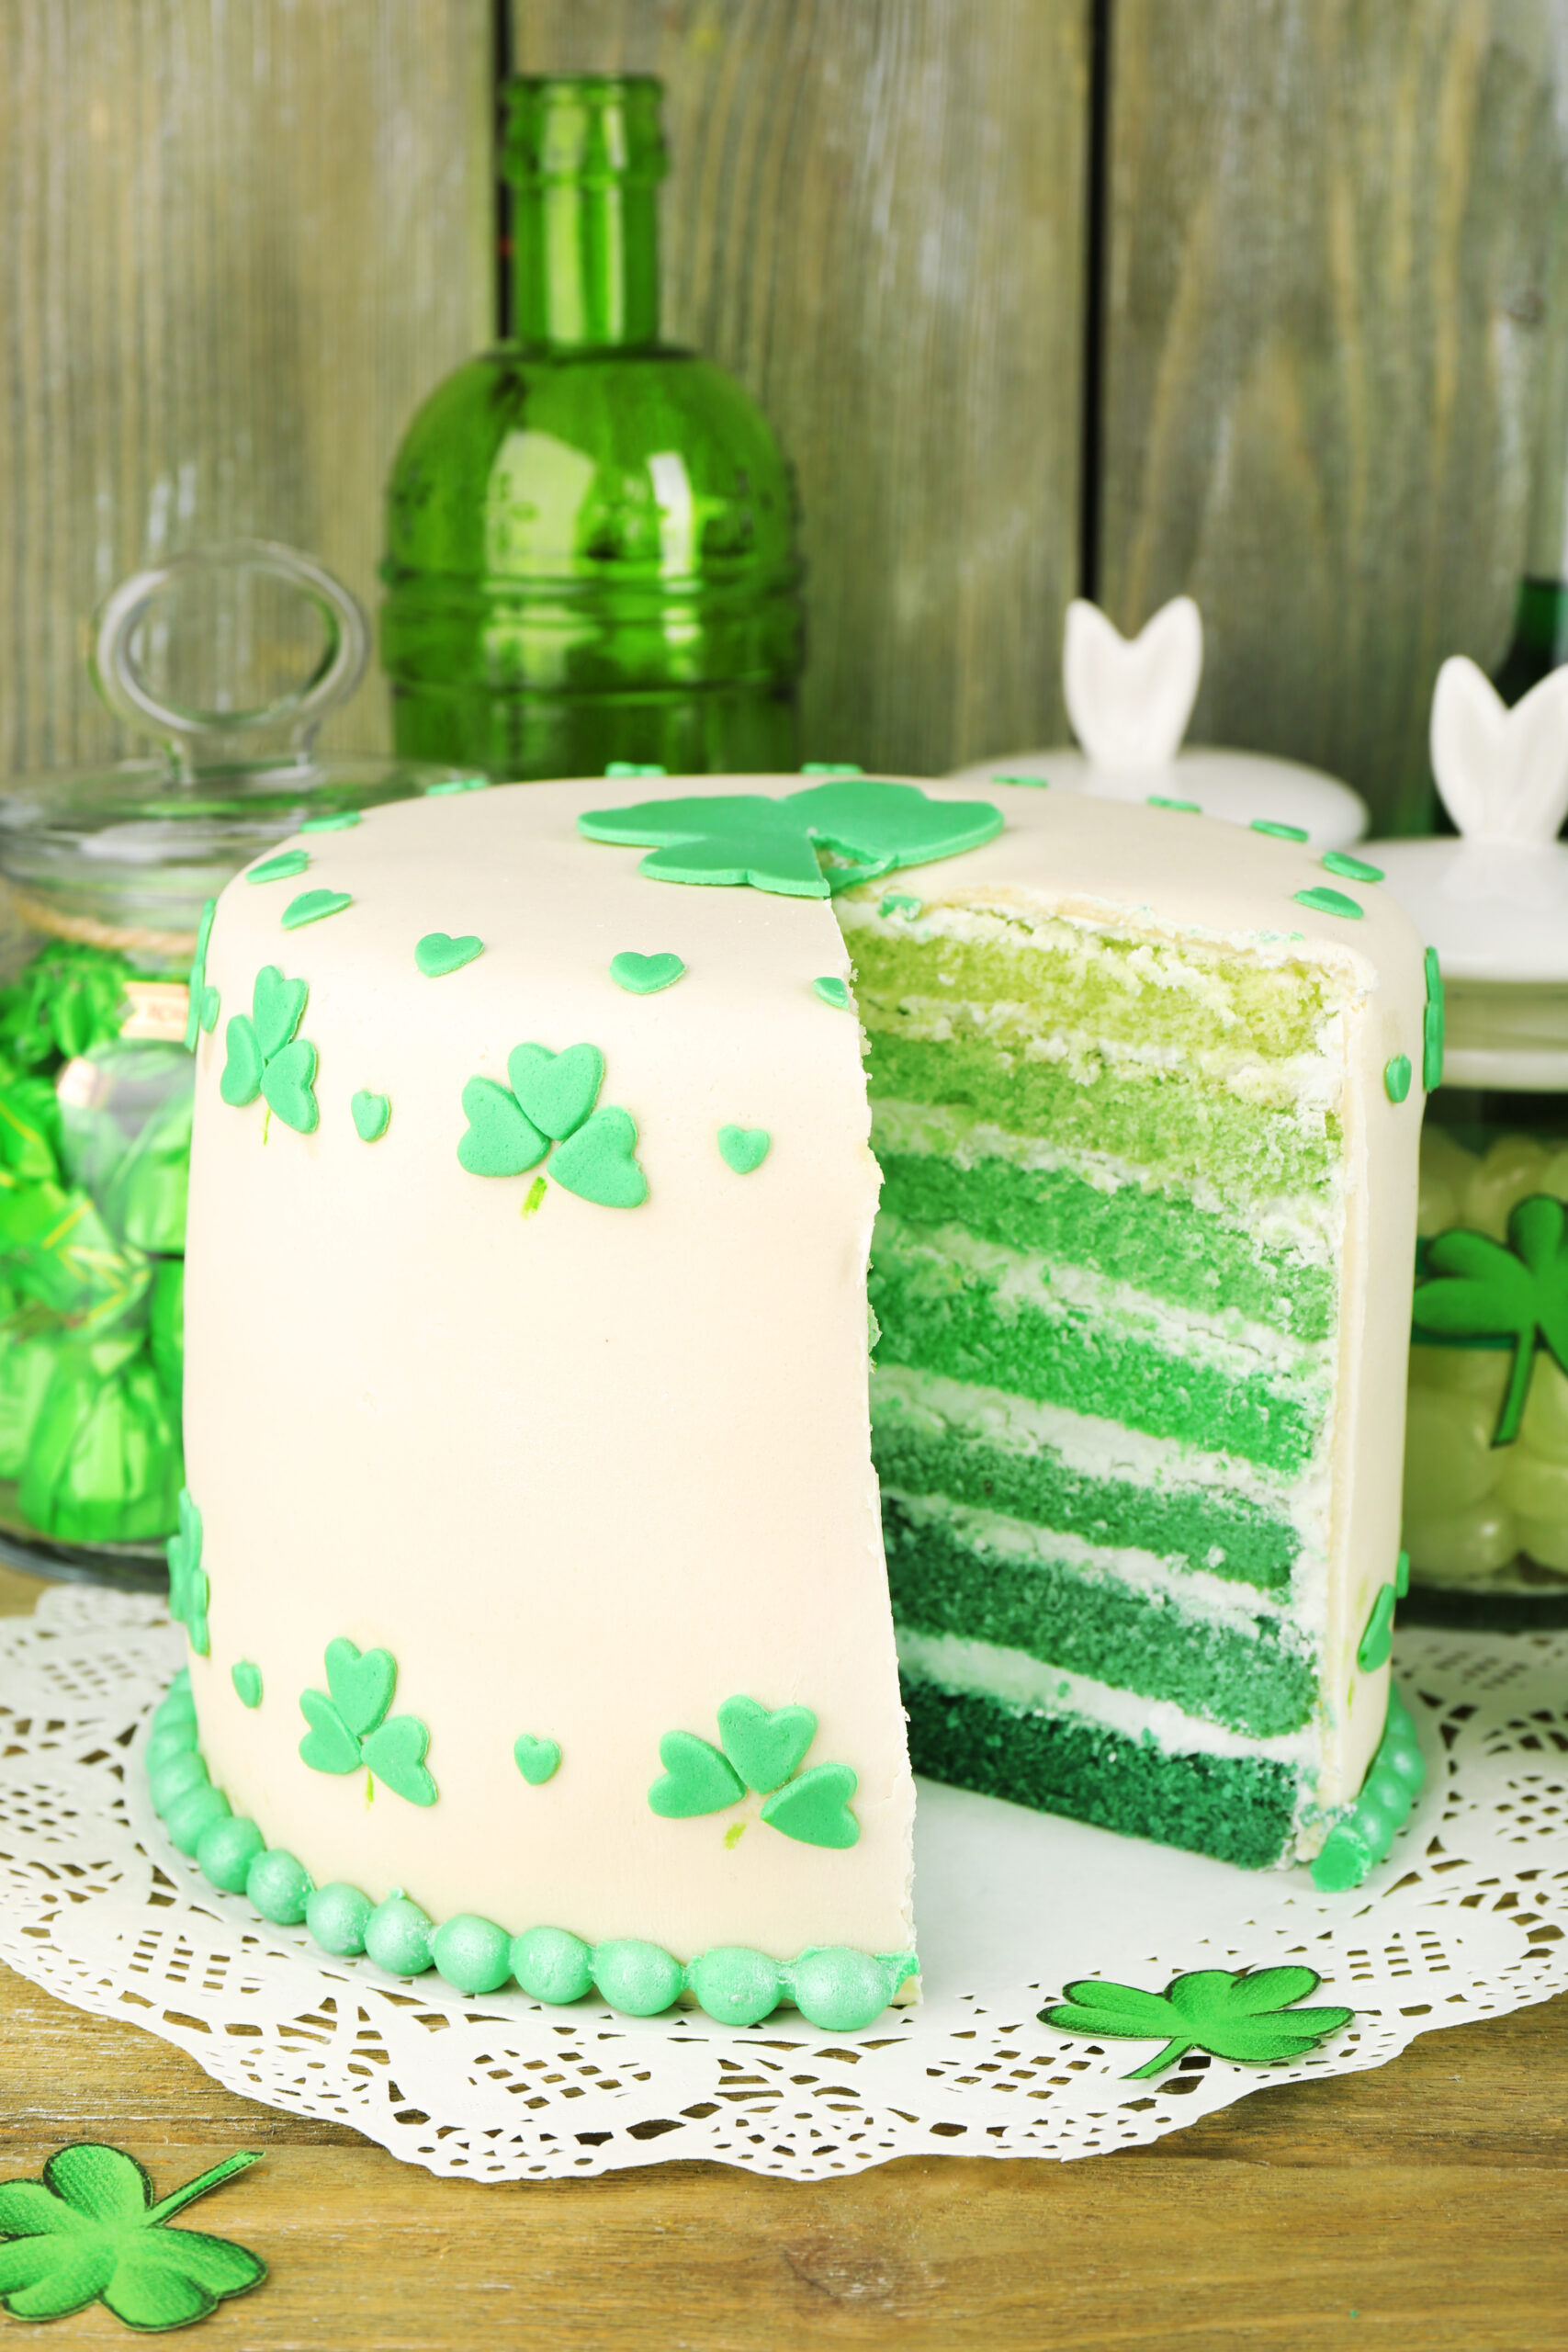 Top 10 St. Patrick's Day Dessert Recipes; St. Patrick's day recipes for desserts along with other green recipes for this Irish holiday!